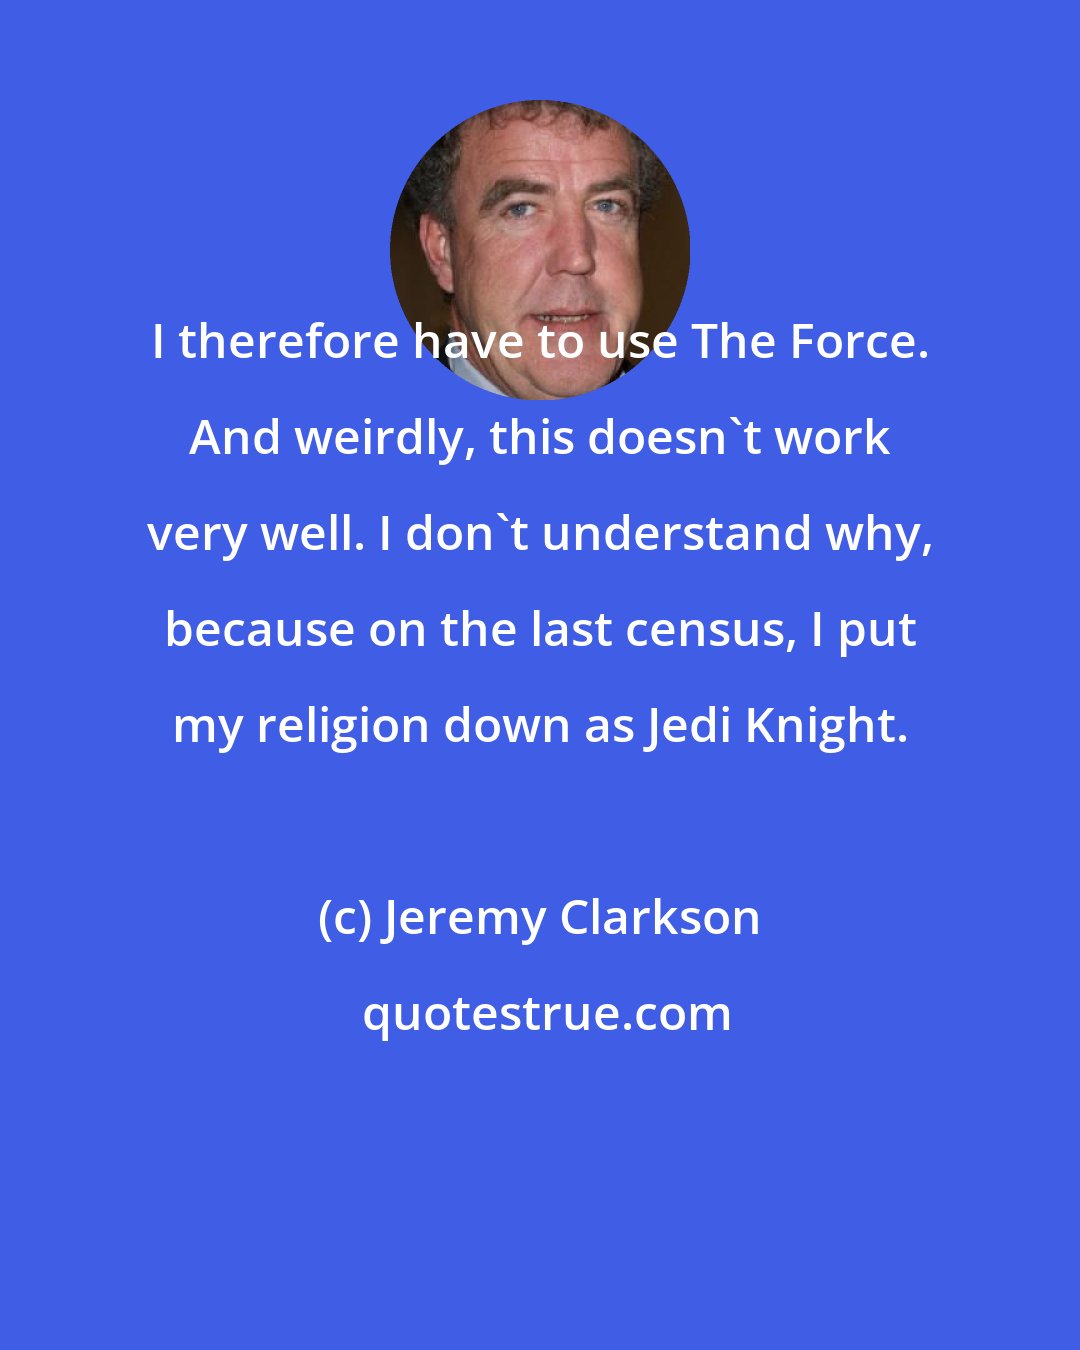 Jeremy Clarkson: I therefore have to use The Force. And weirdly, this doesn't work very well. I don't understand why, because on the last census, I put my religion down as Jedi Knight.